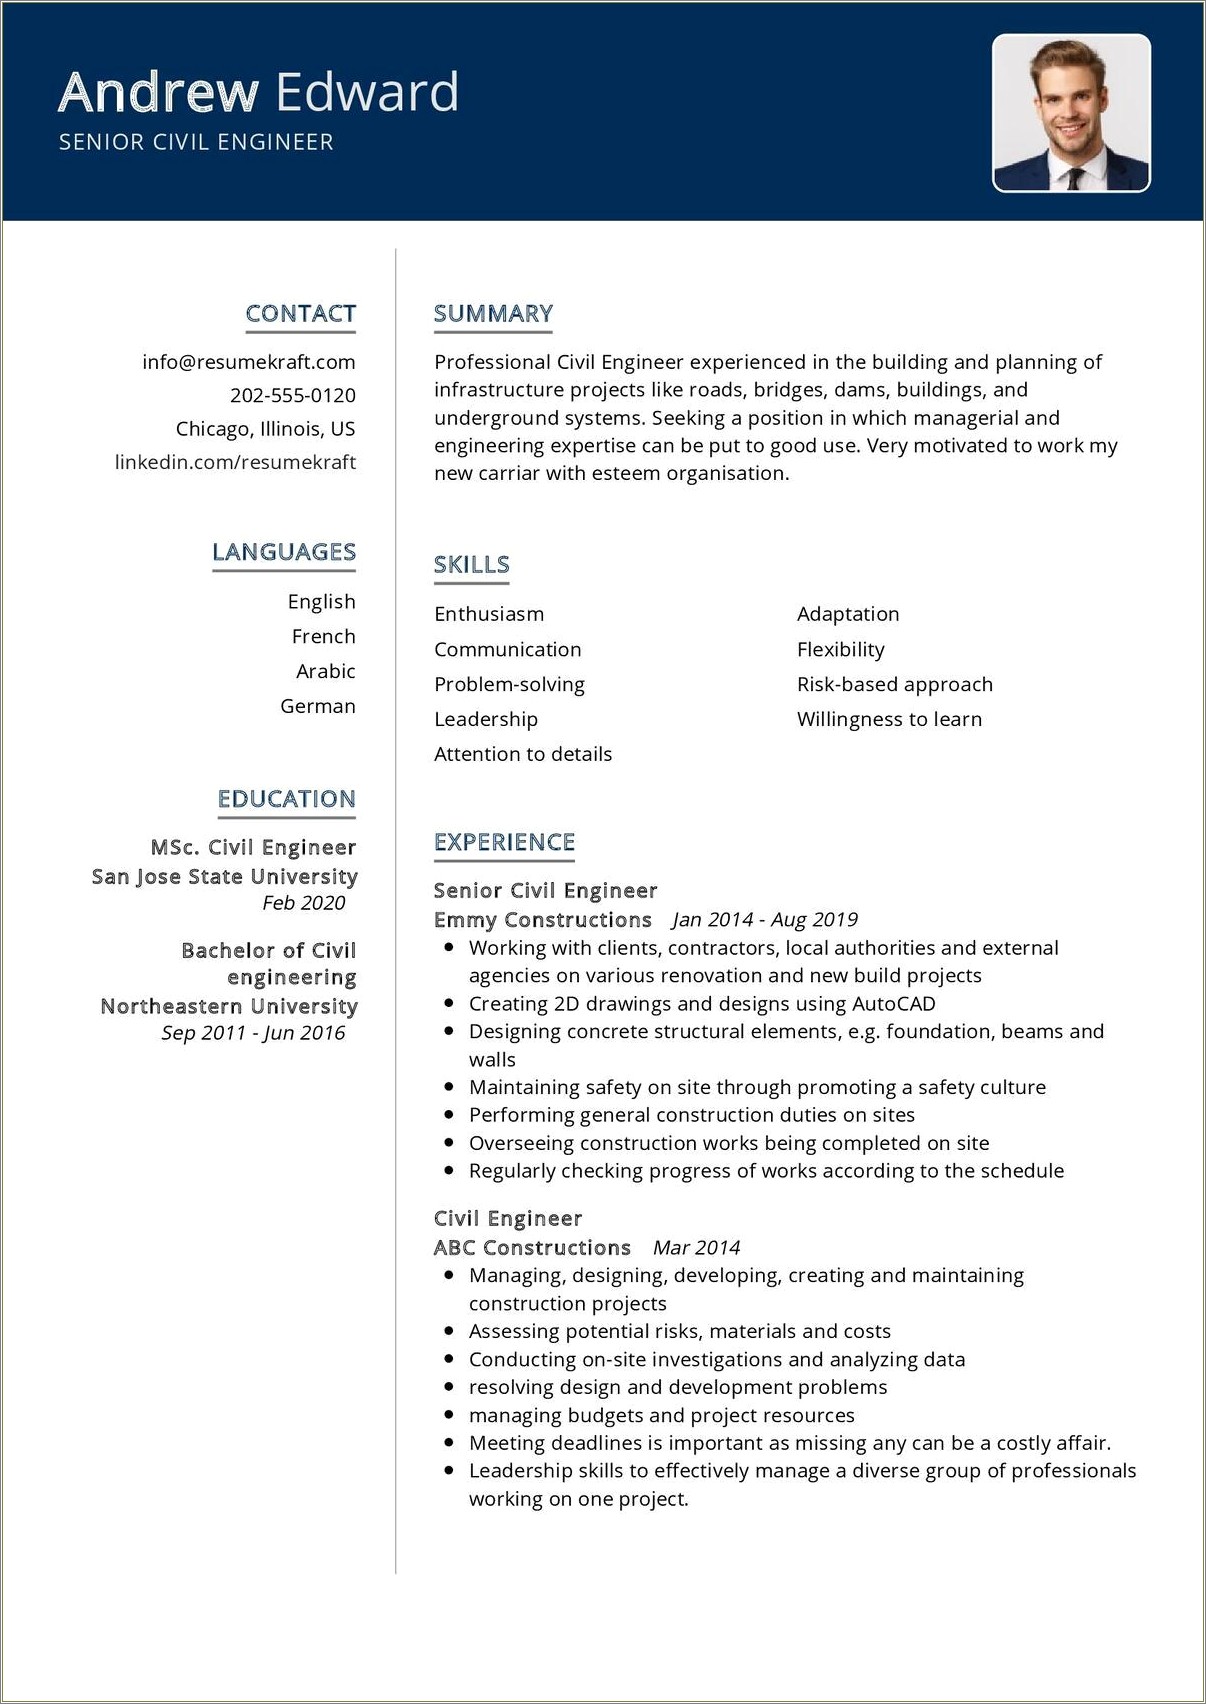 Resume Objective For Experienced Civil Engineer